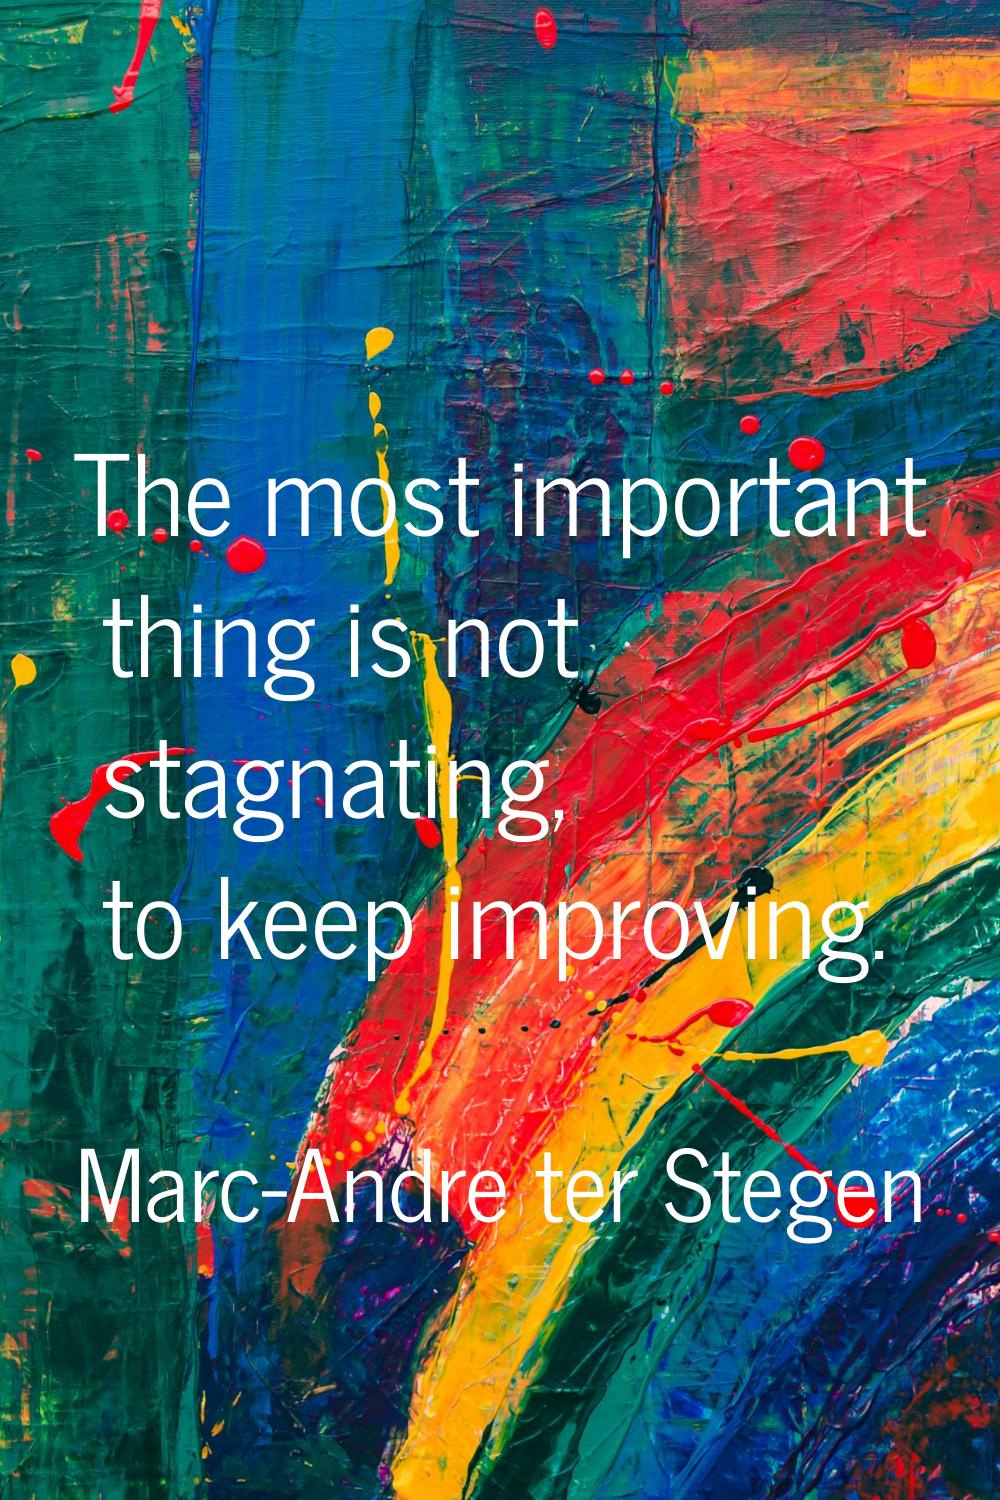 The most important thing is not stagnating, to keep improving.